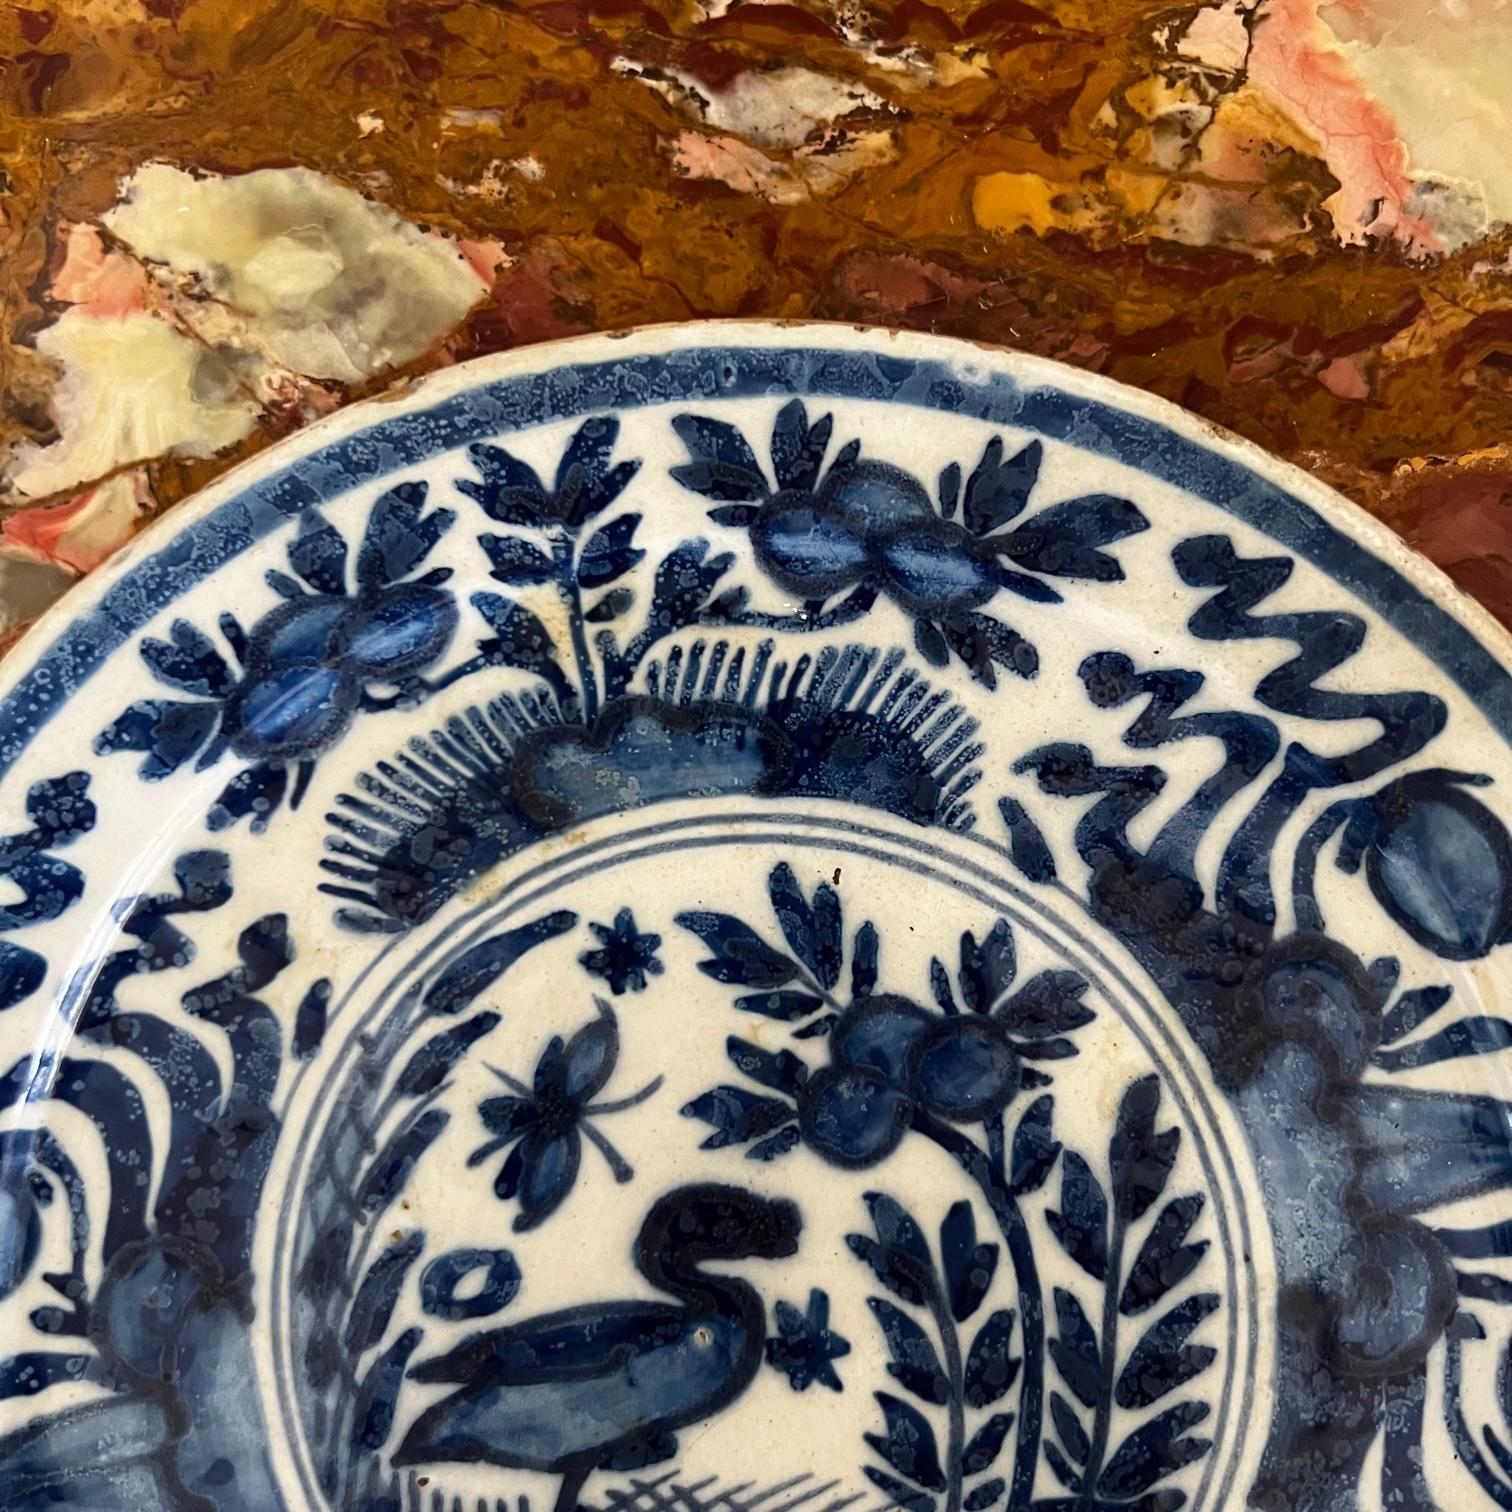 18th Century Dutch delftware cabinet plate. Hand crafted tin glazed earthenware pottery fully hand painted in blue and white floral decor In the center a bird with flowers surrounded by trees. Origin: the Netherlands 18th century style; Louis XVI